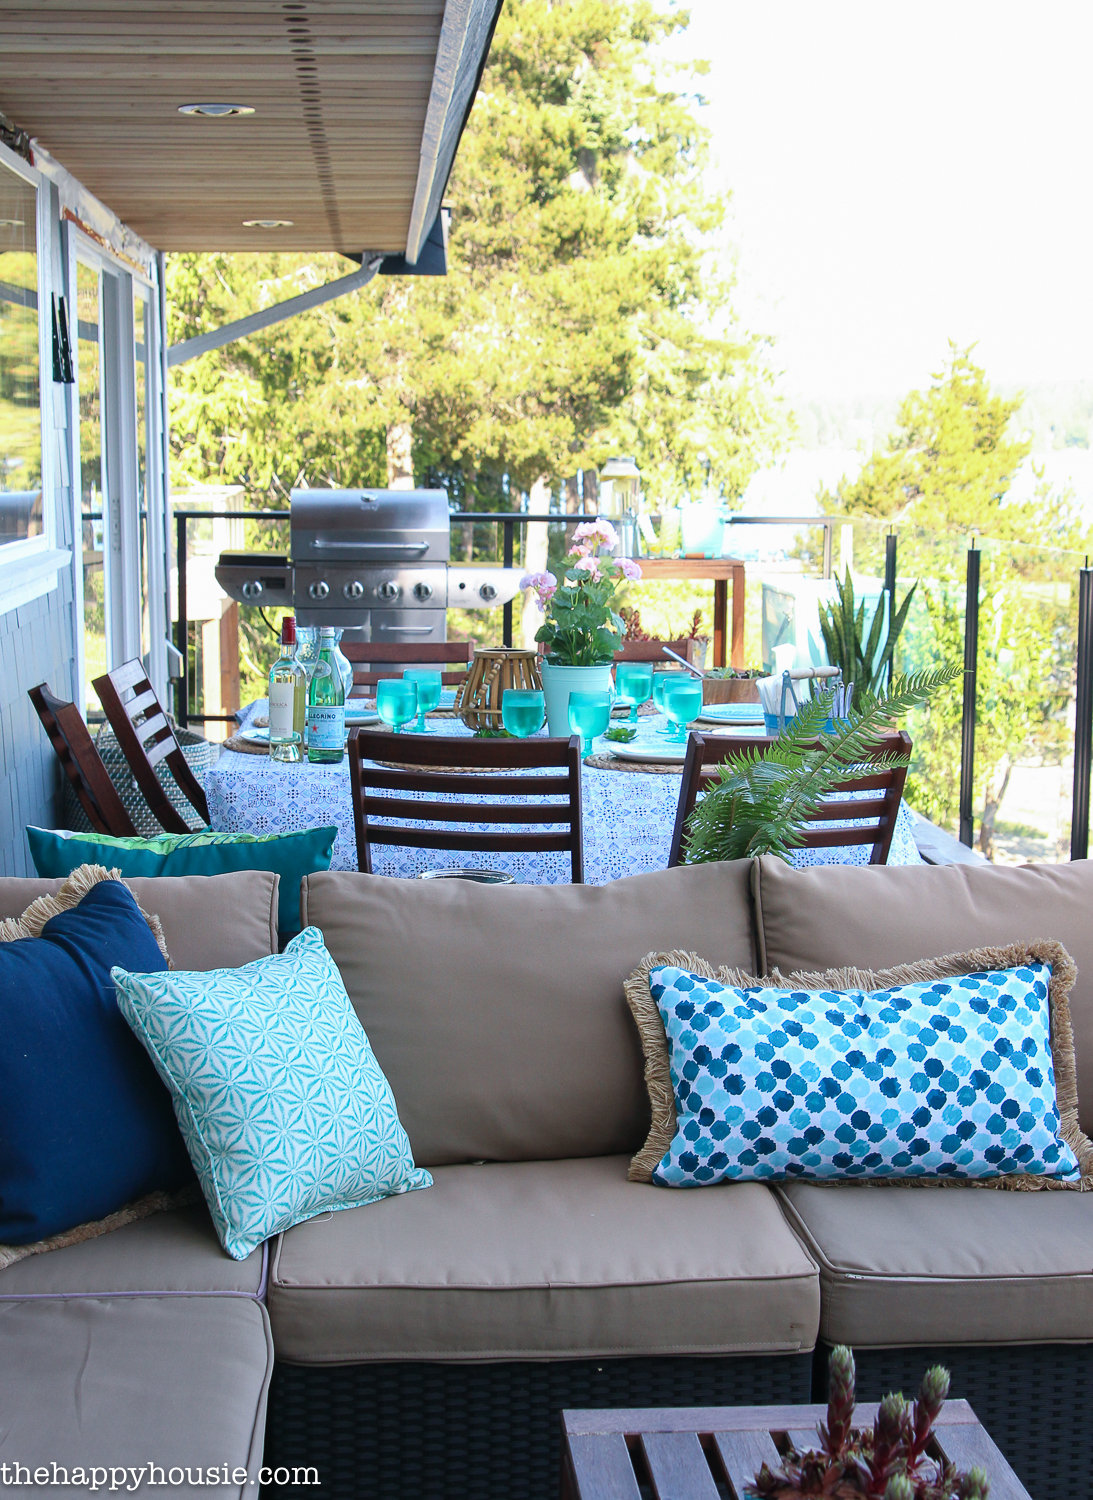 A look at the patio with the pillows and table set for a meal.